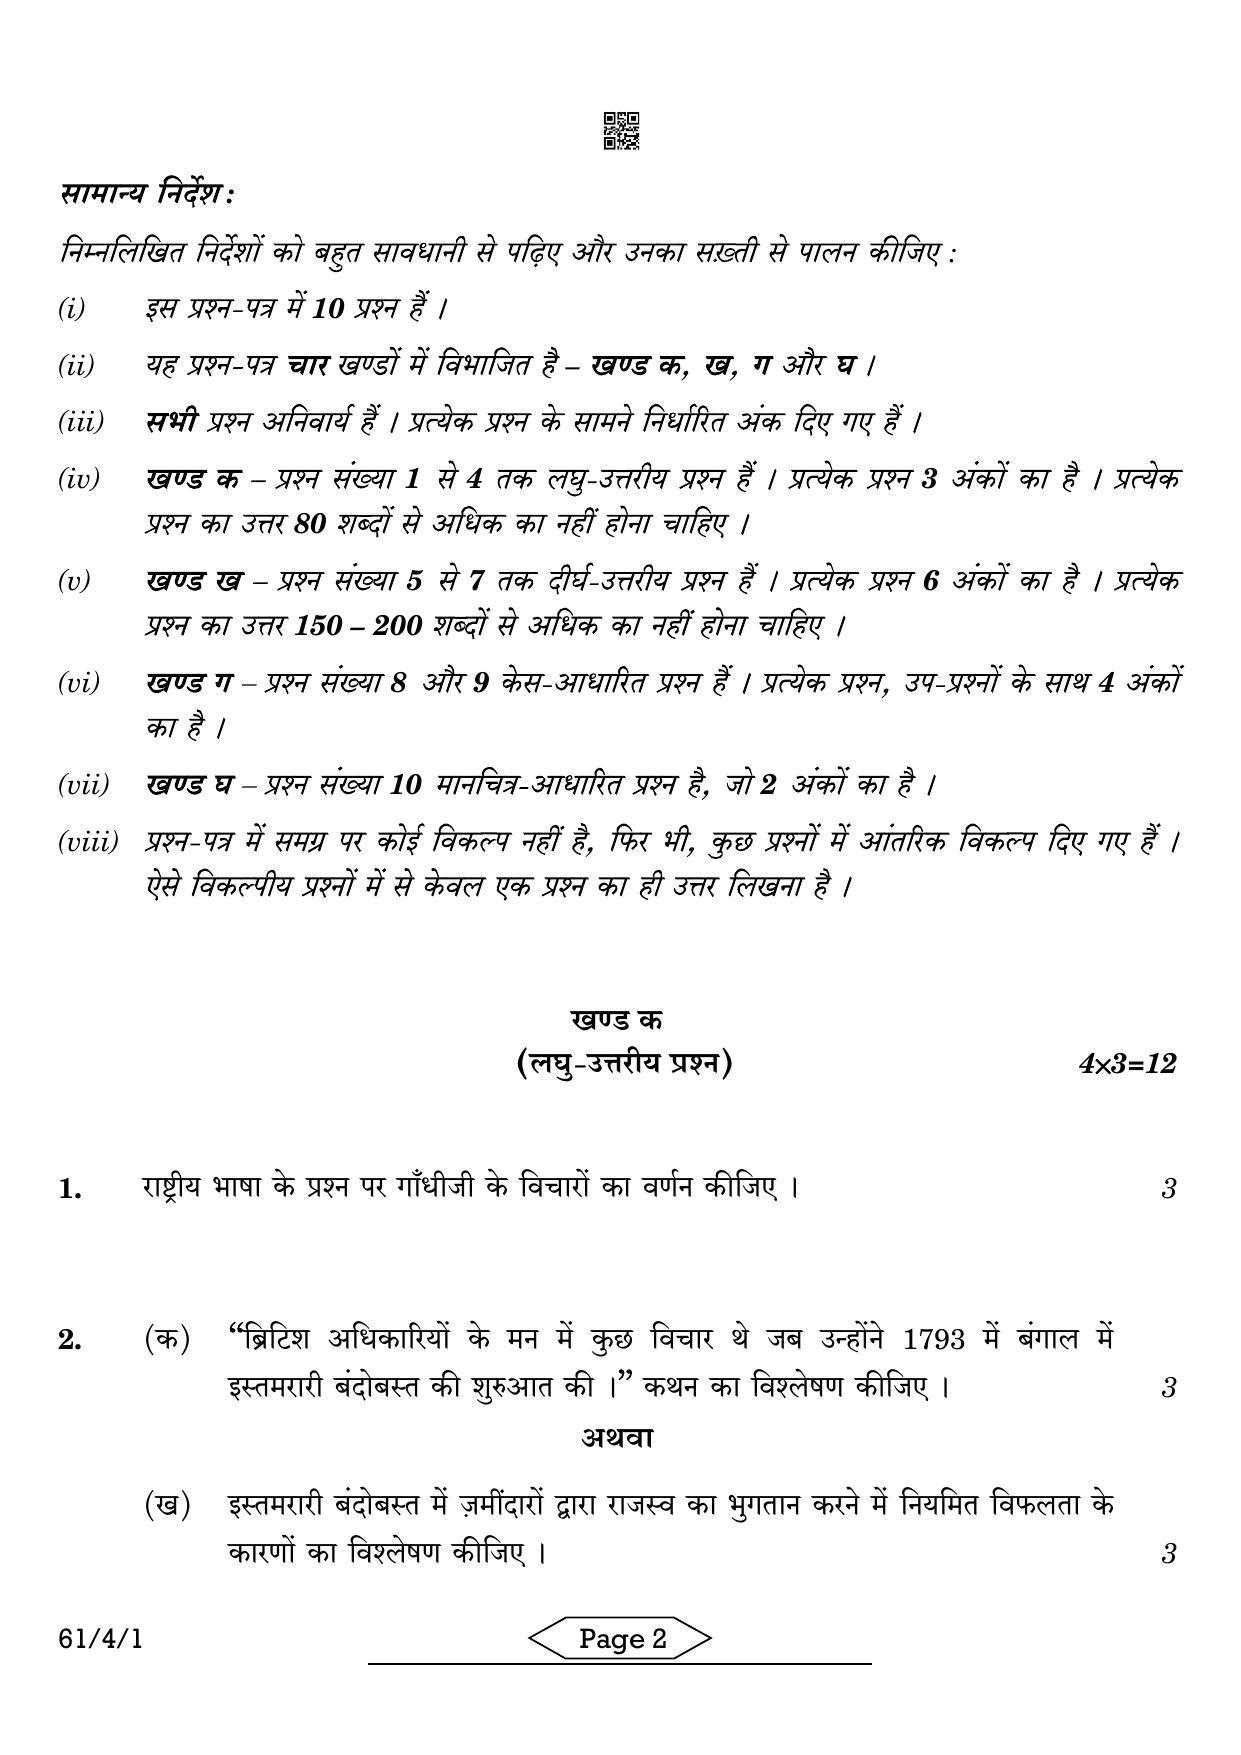 CBSE Class 12 61-4-1 History 2022 Question Paper - Page 2